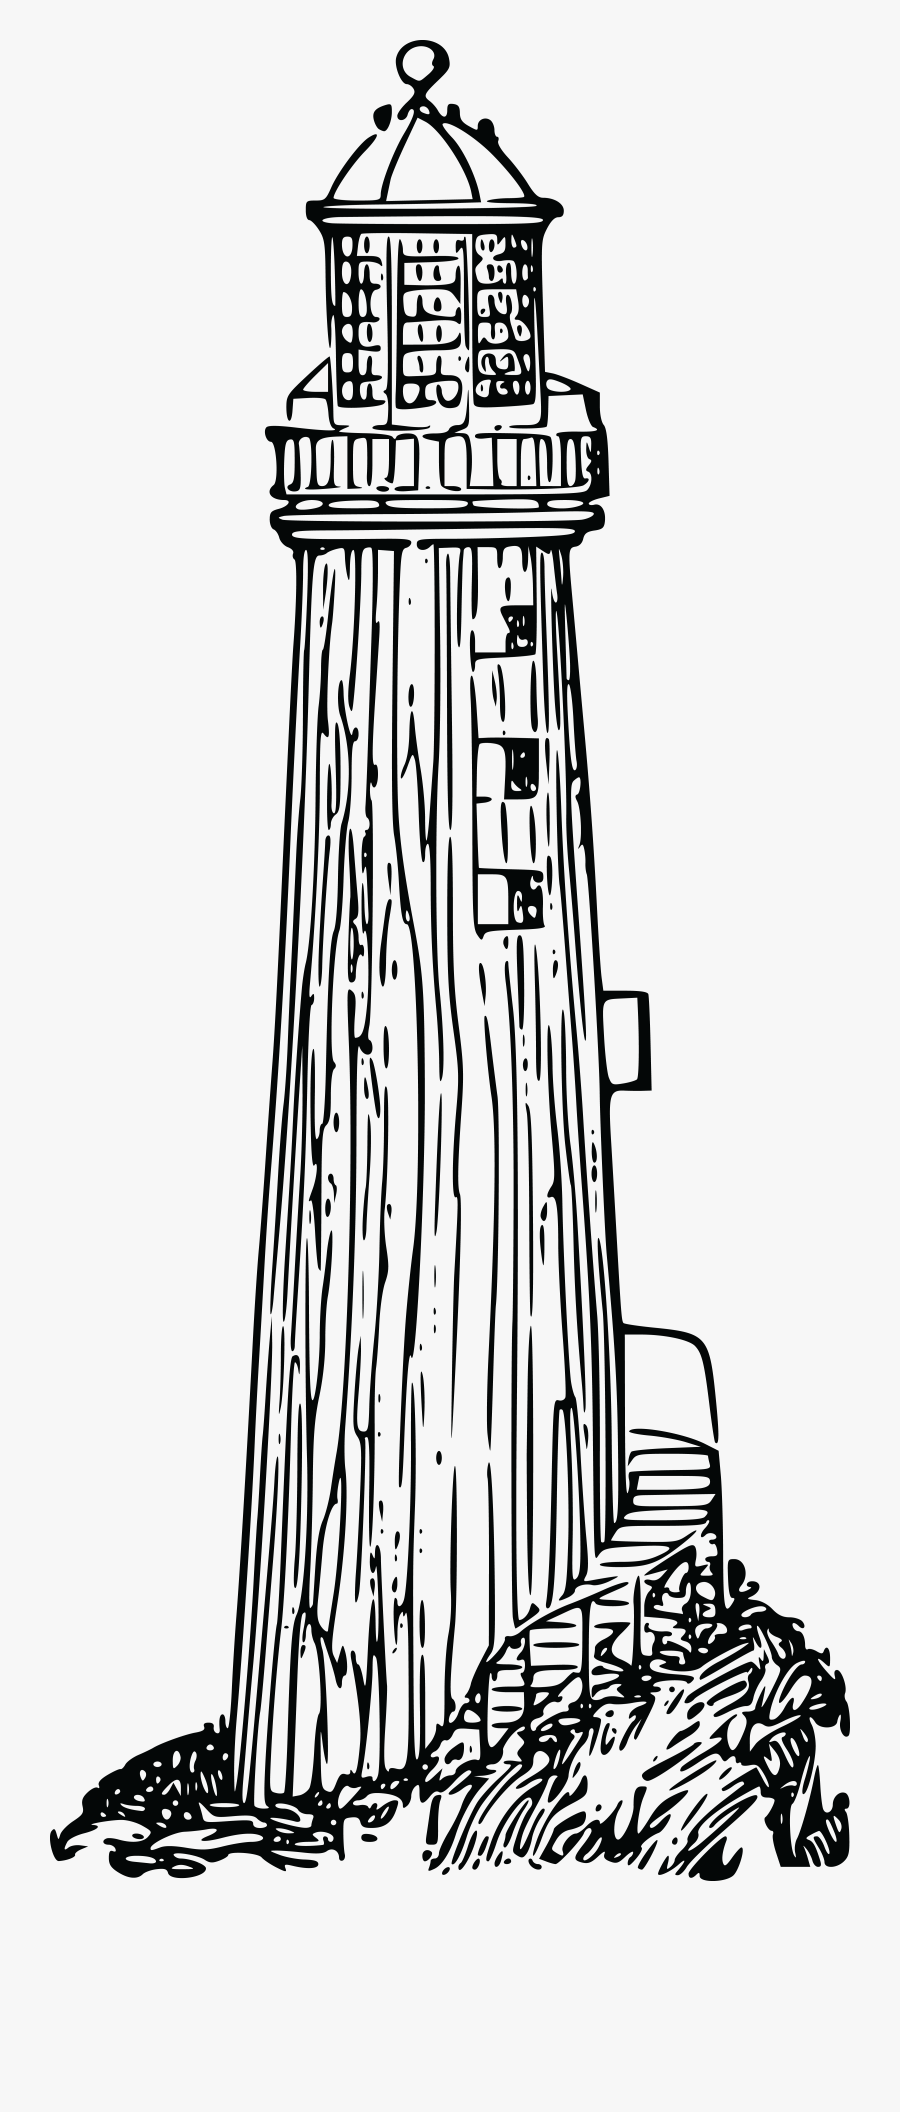 Drawing Lighthouses Pen And Ink - Old Lighthouse Clipart, Transparent Clipart